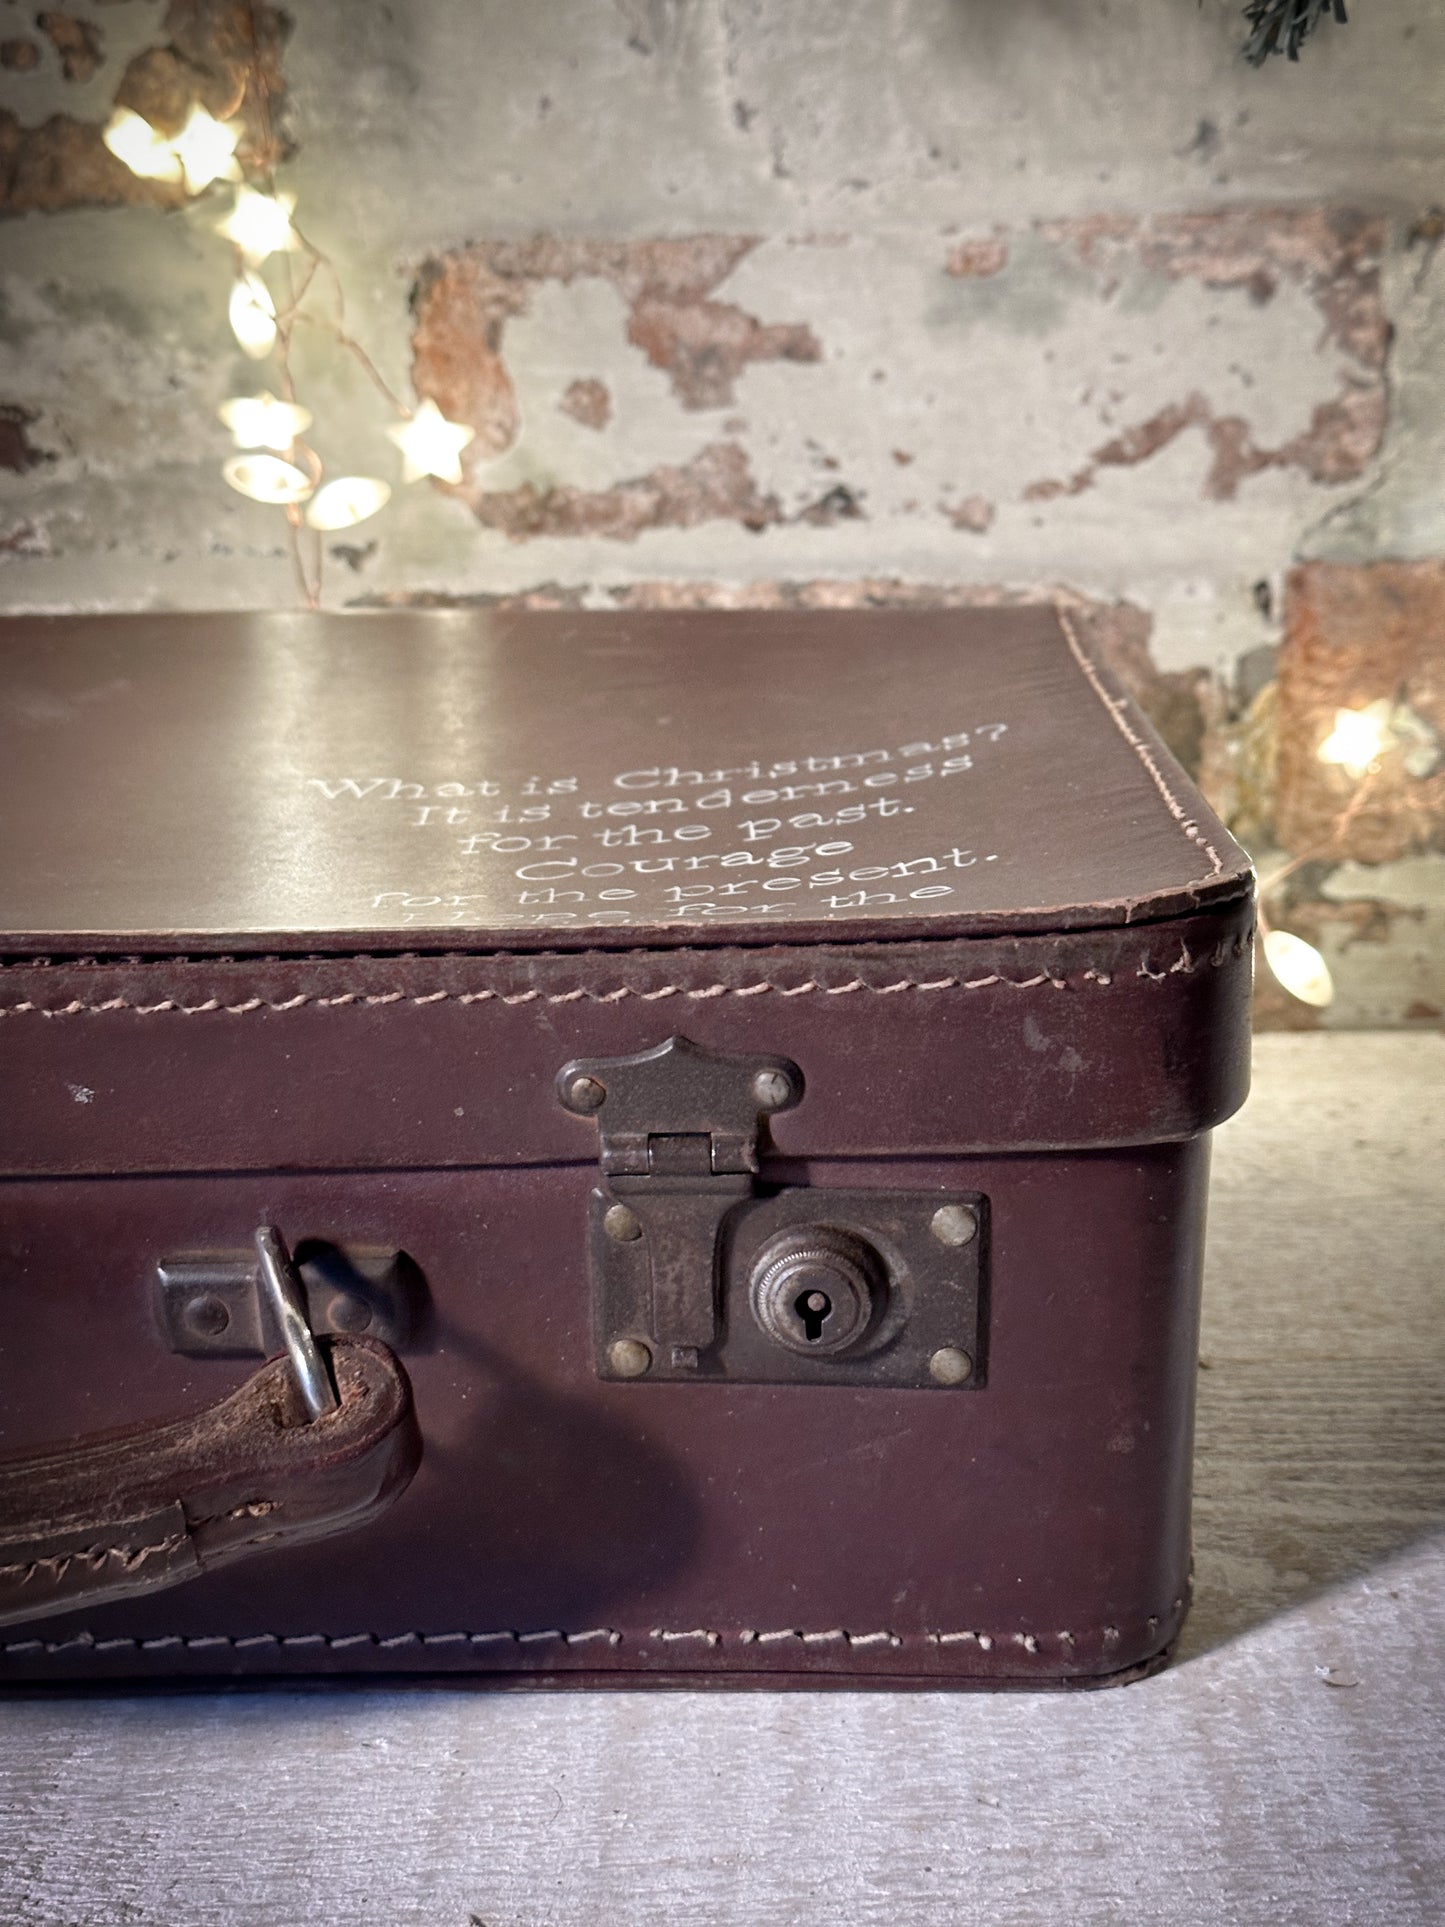 A gorgeous vintage suitcase with a hand painted quote for storing Christmas decorations